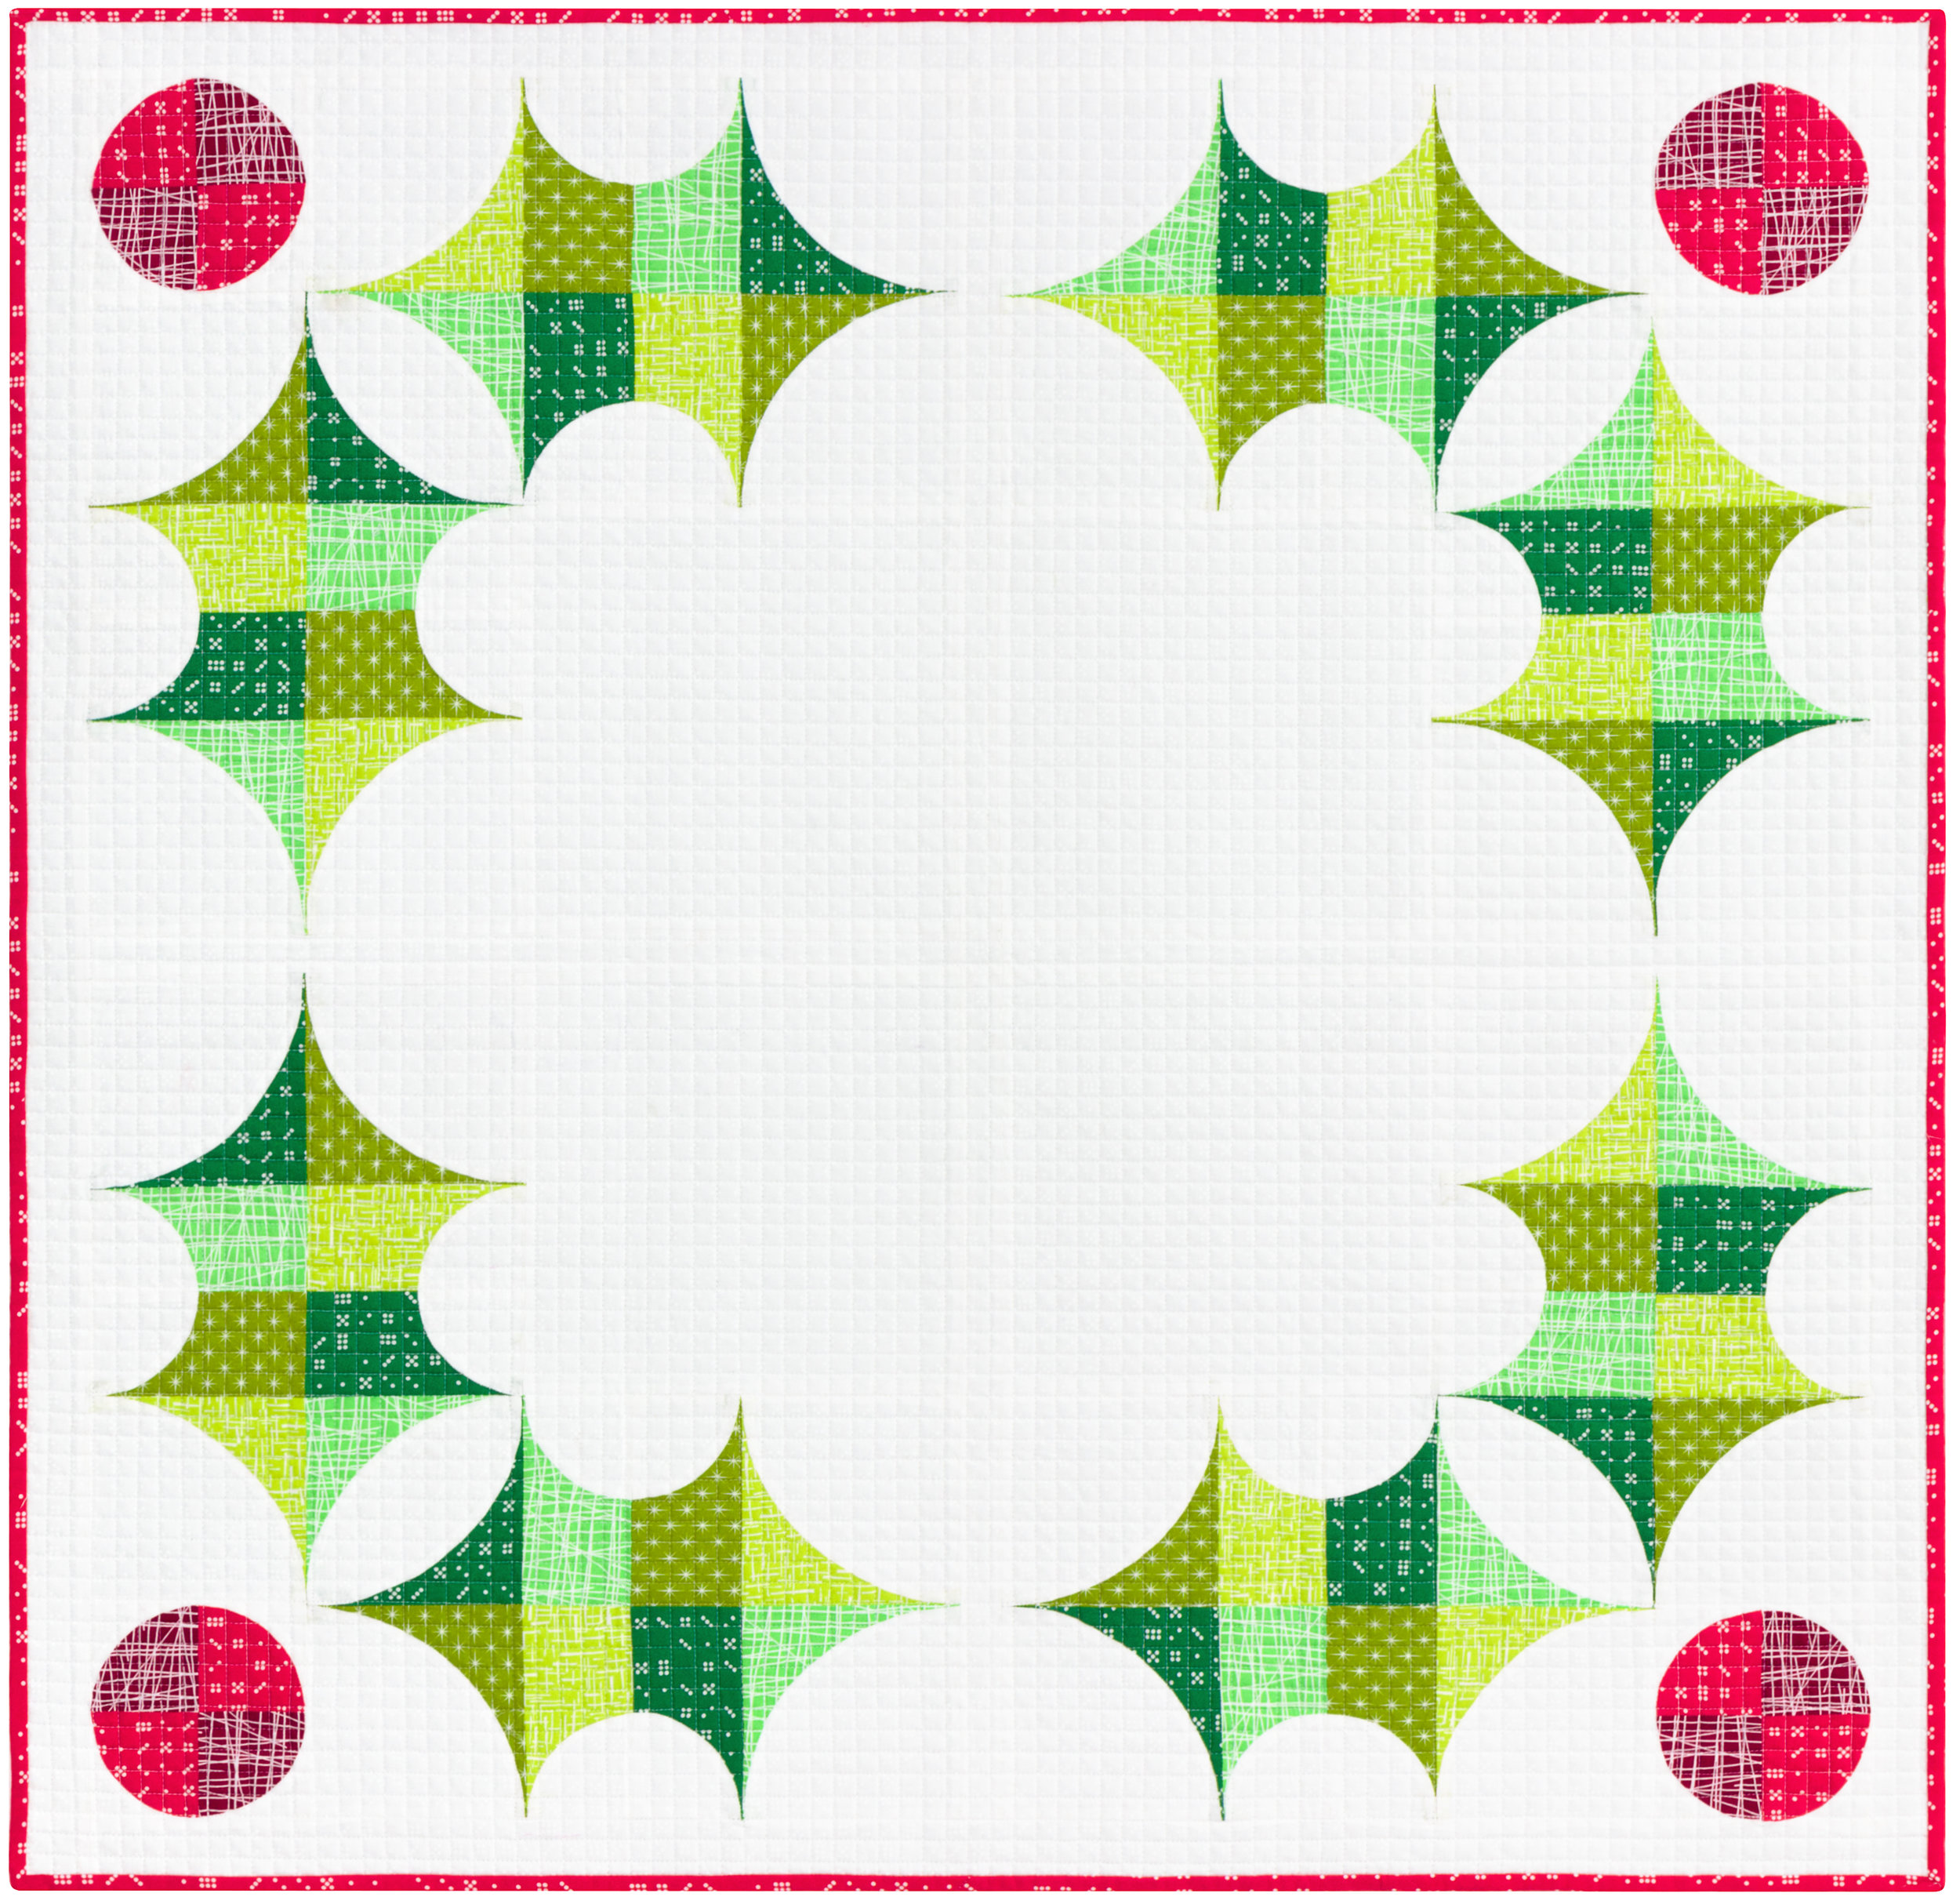 The Holly Holiday Quilt 55 x 55 Quilt Foundation Paper Piecing Pattern